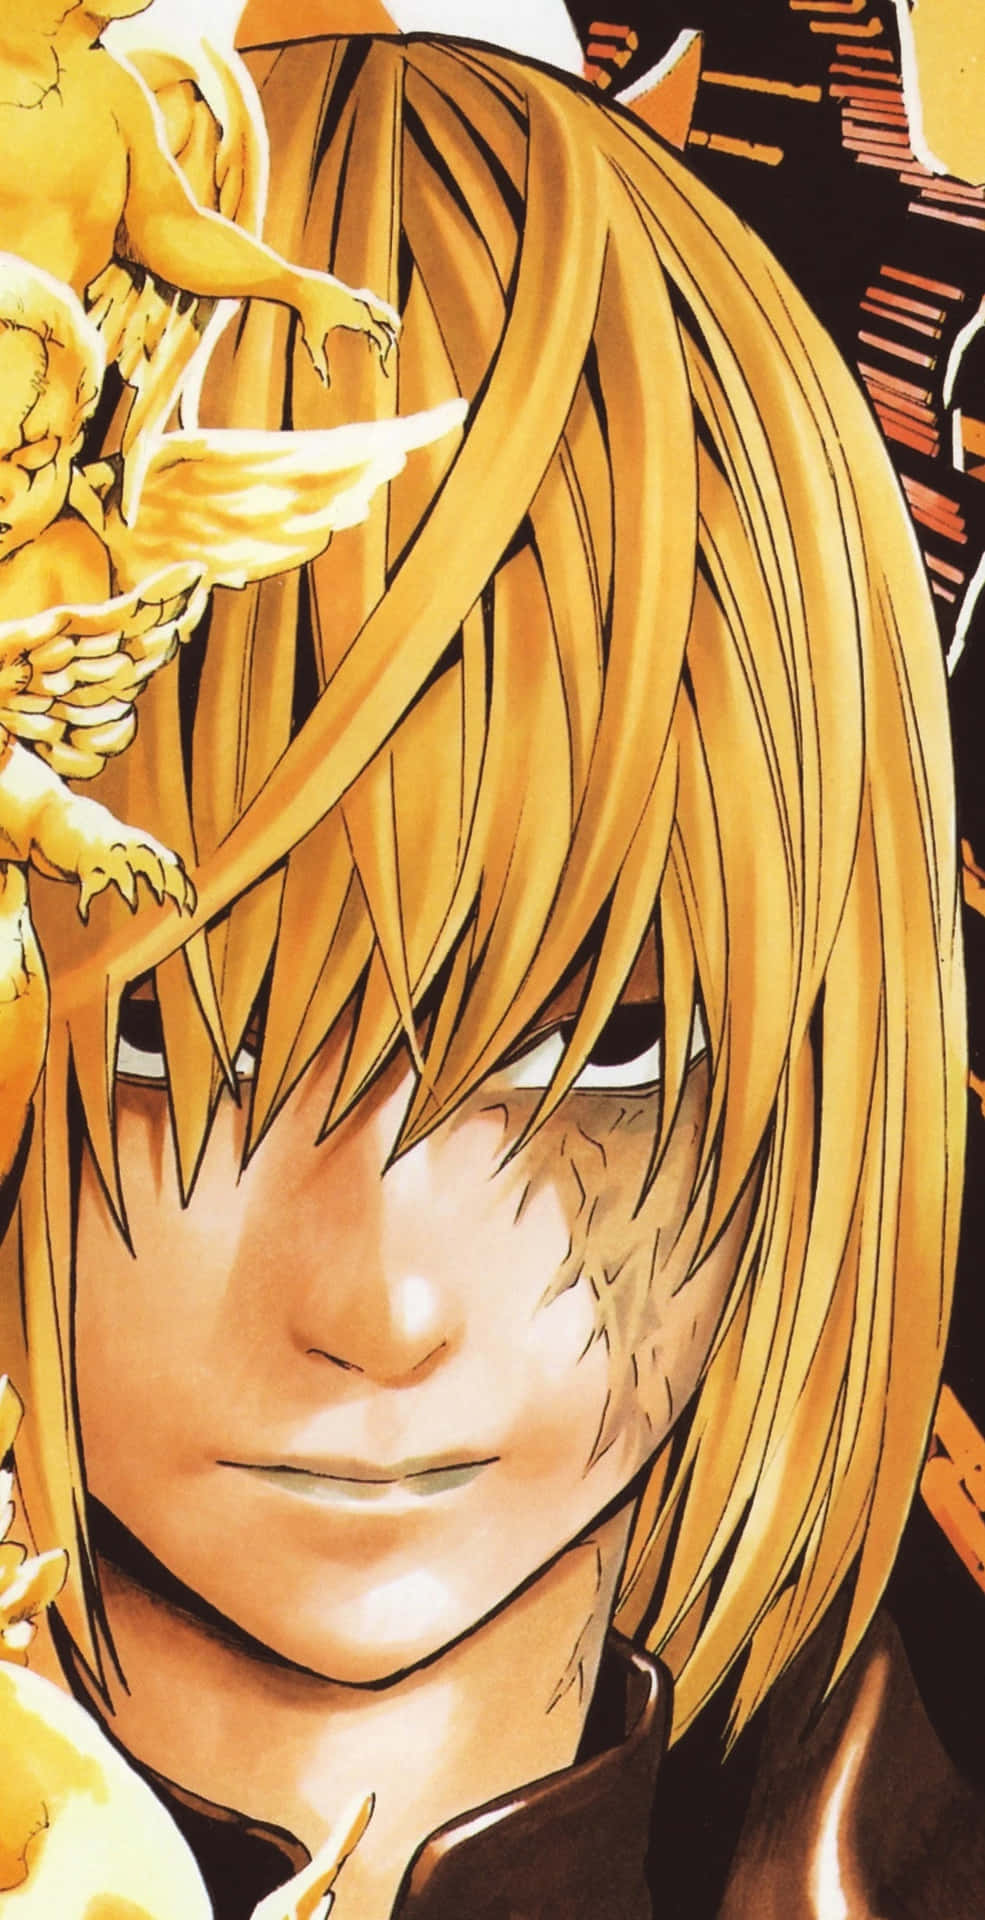 Mello, a brilliant strategist from Death Note anime, deep in thought Wallpaper